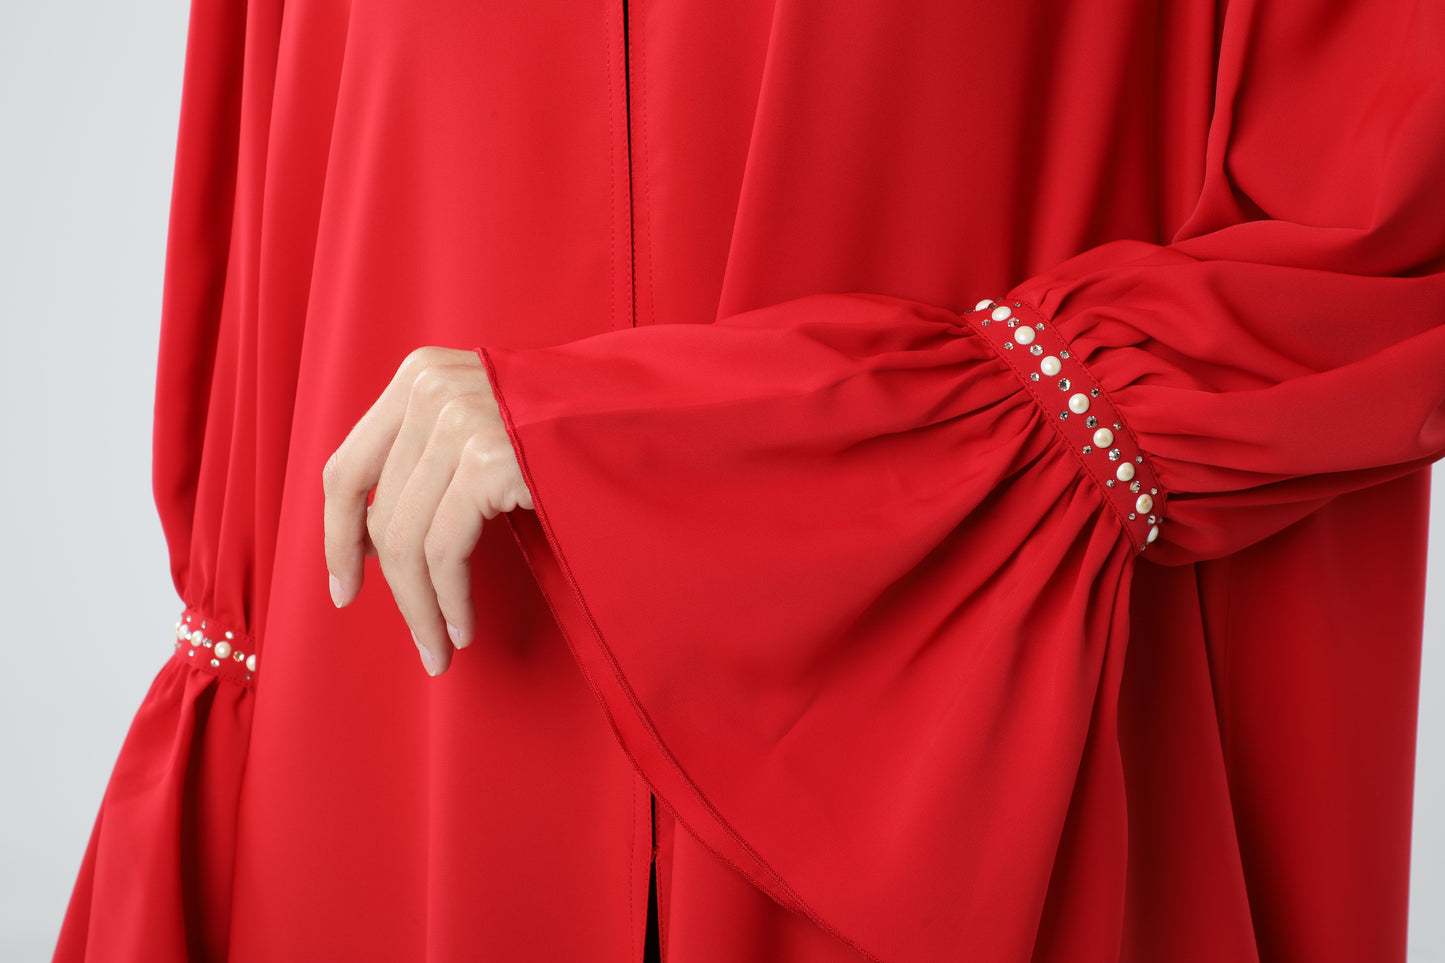 Red Abaya With Sleeves Design